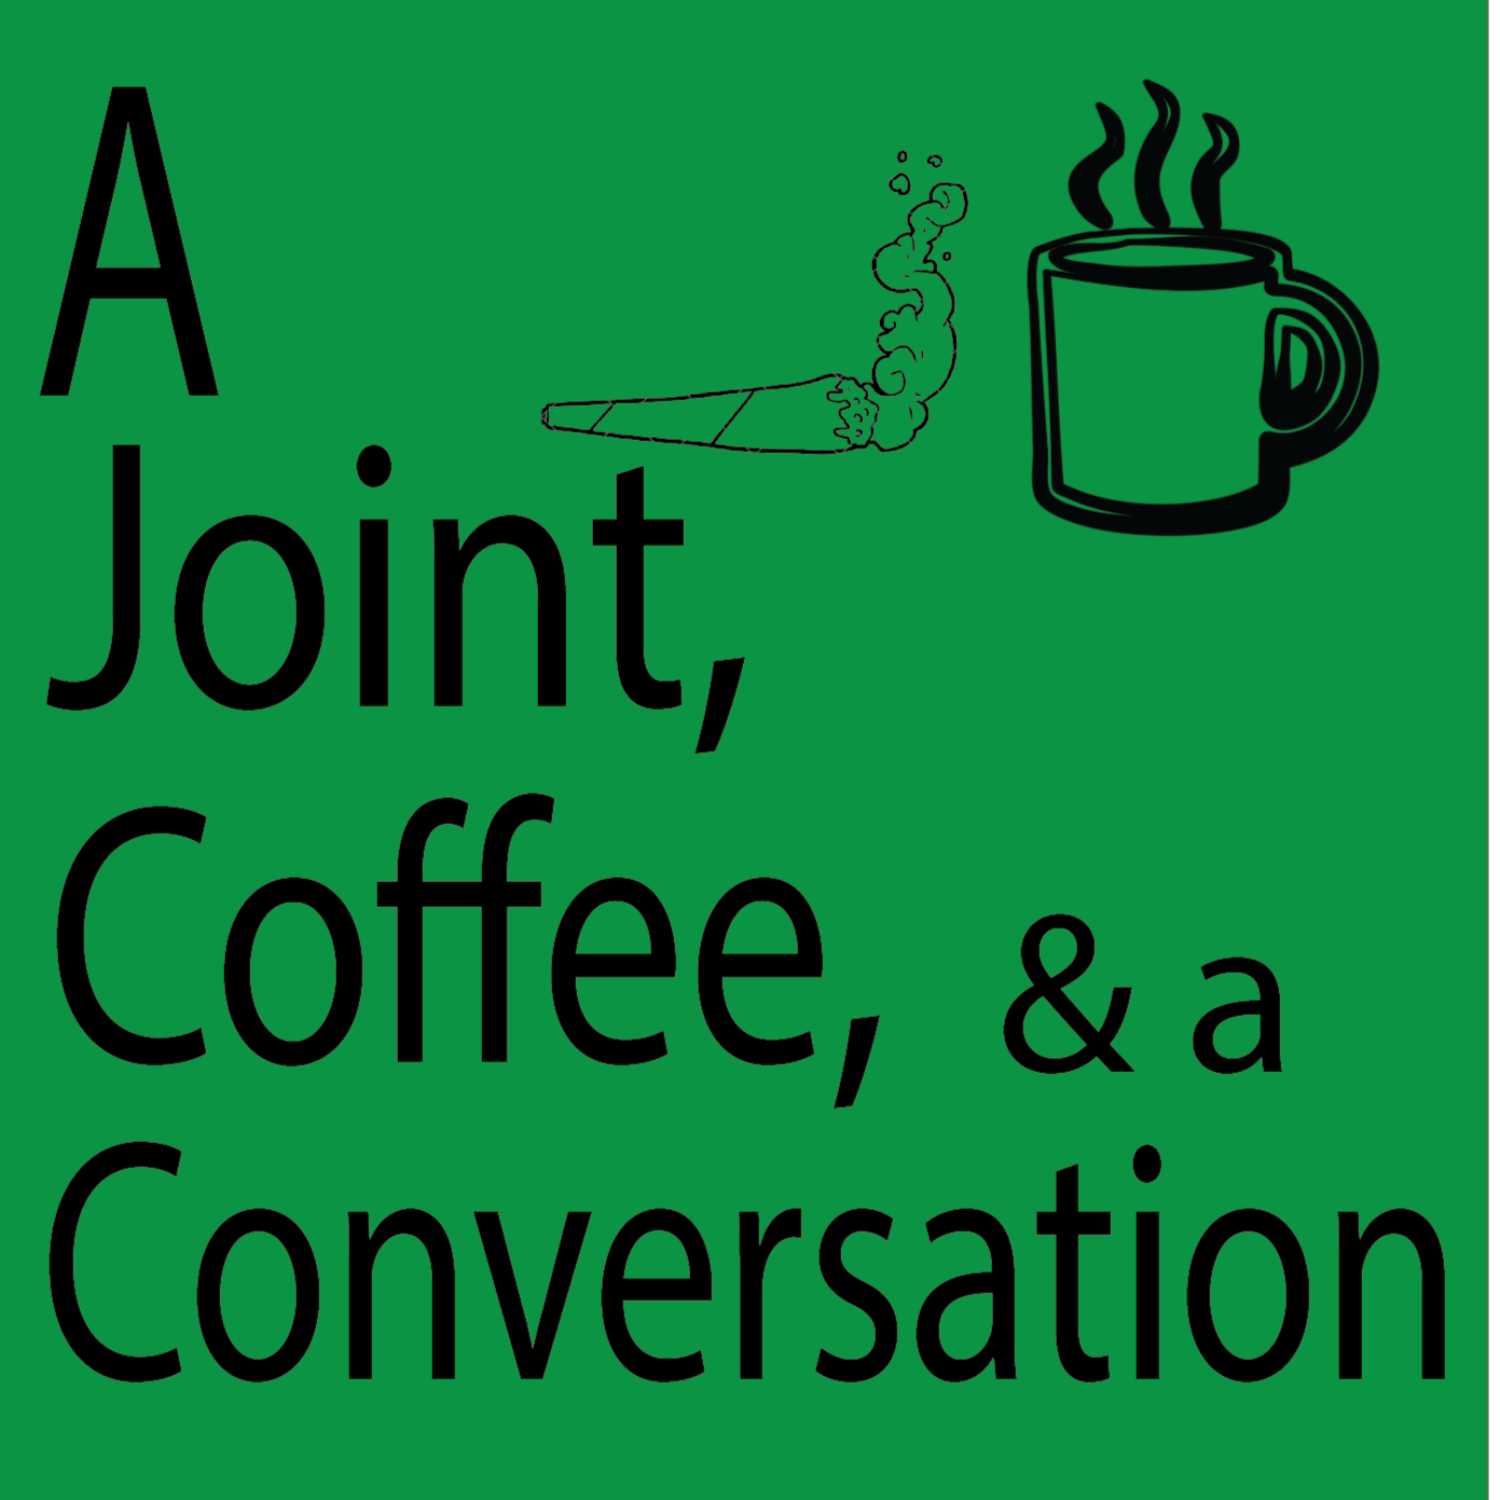 A Joint, Coffee, and a Conversation